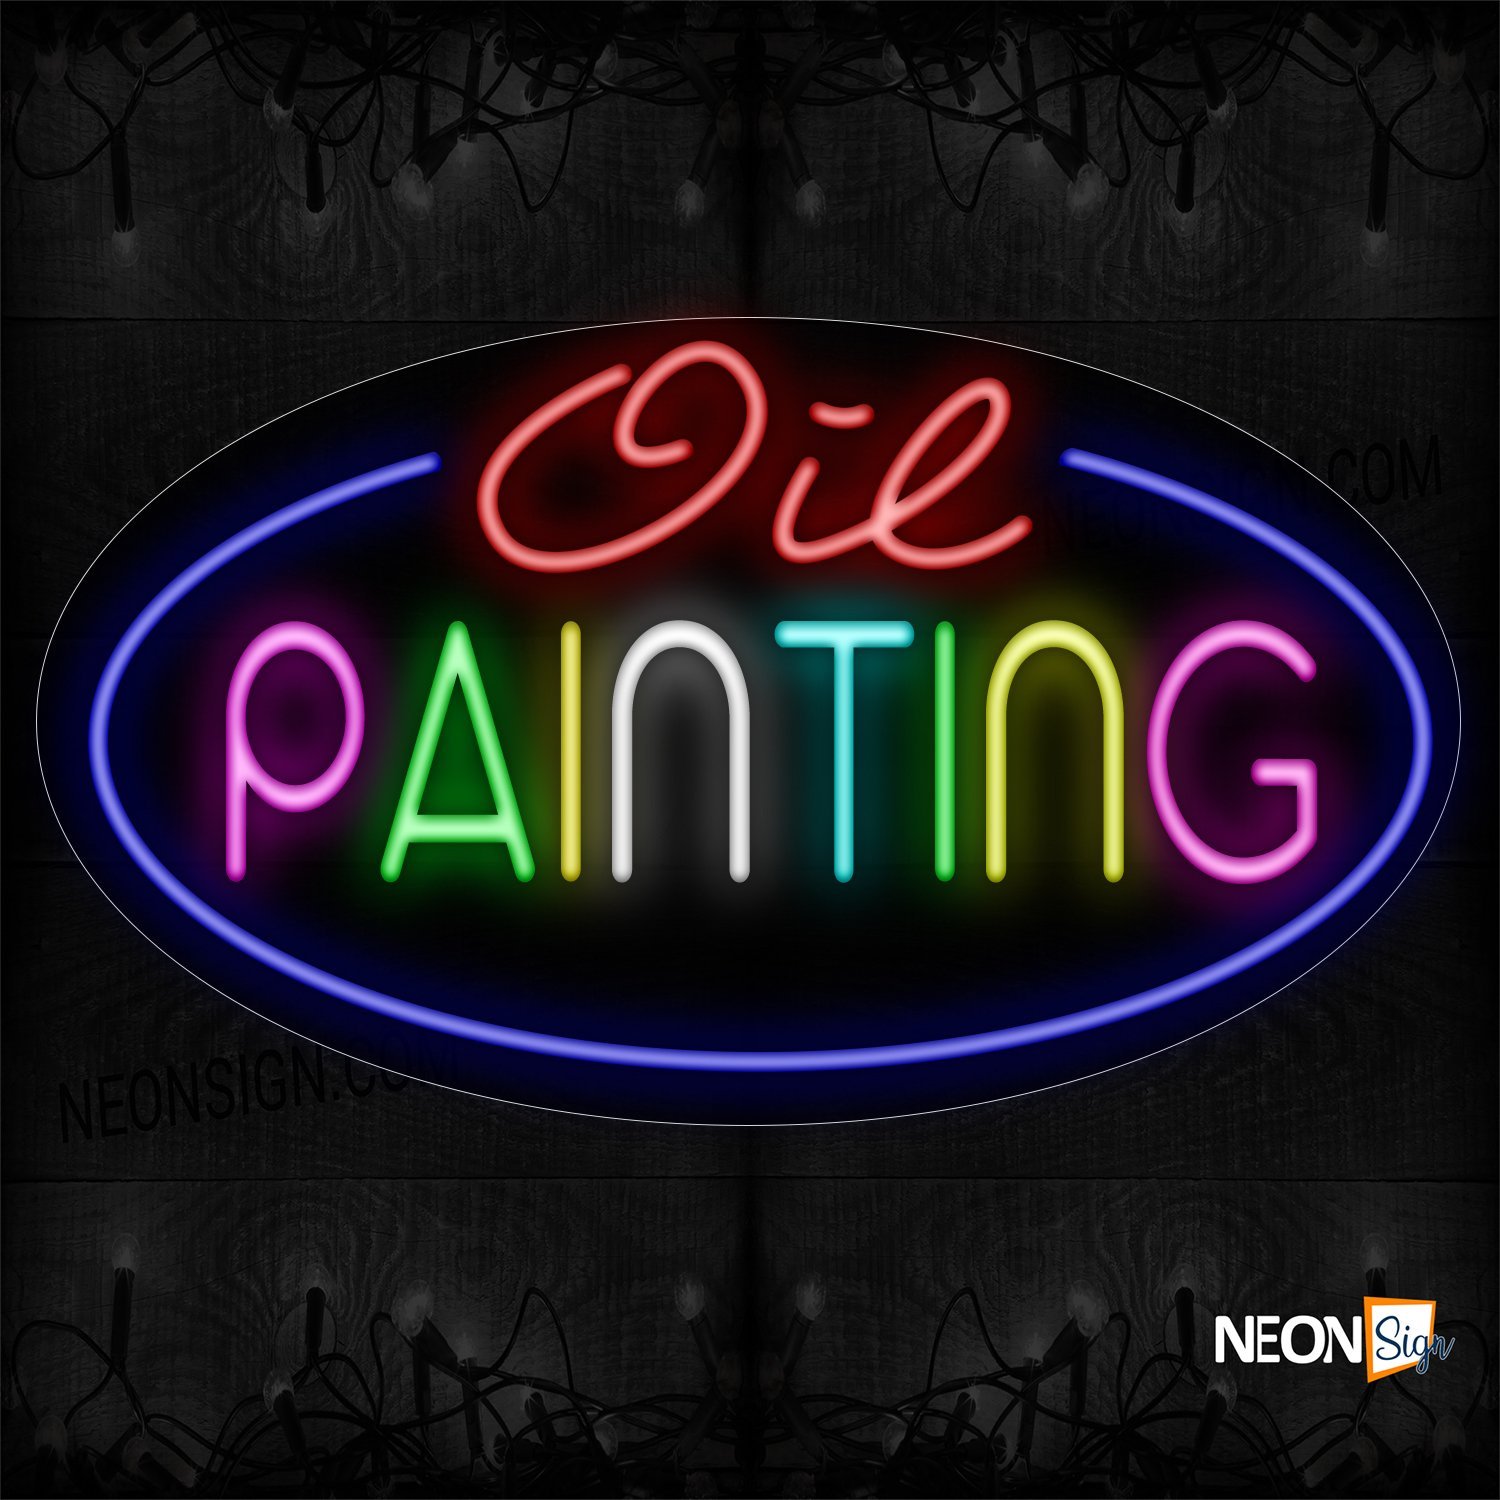 Image of 14462 Oil Printing With Circle Border Neon Signs_17x30 Contoured Black Backing